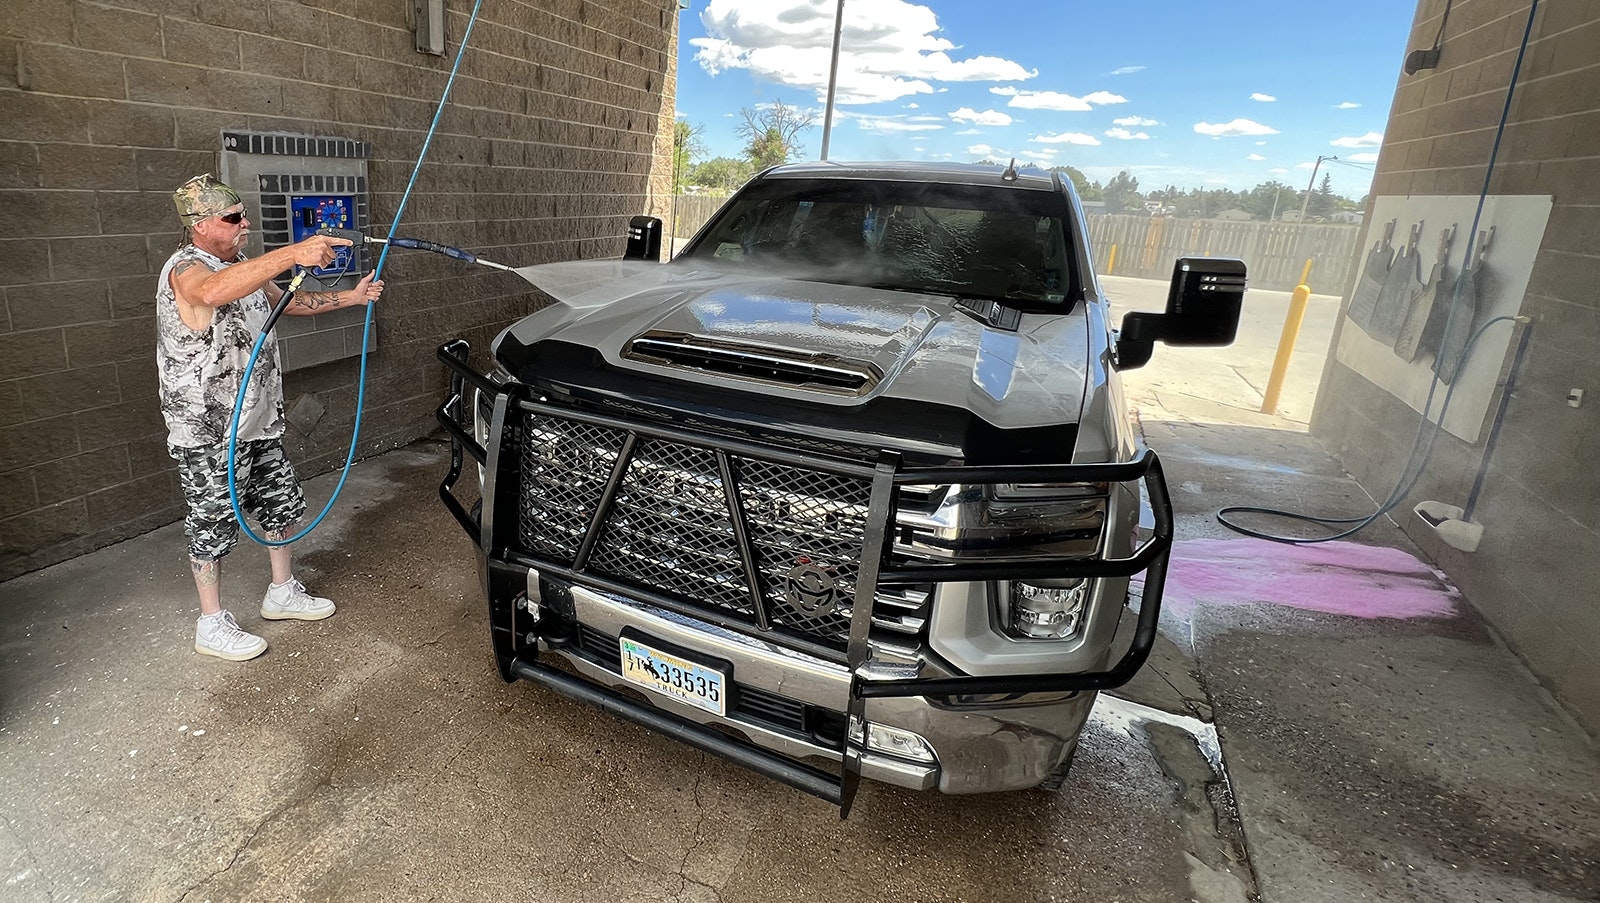 Mark Fillmore of Cheyenne washes his 2020 Chevy 2500 Silverado. While his is a work truck, Fillmore said he has another truck at home and that he's a truck guy through and through.